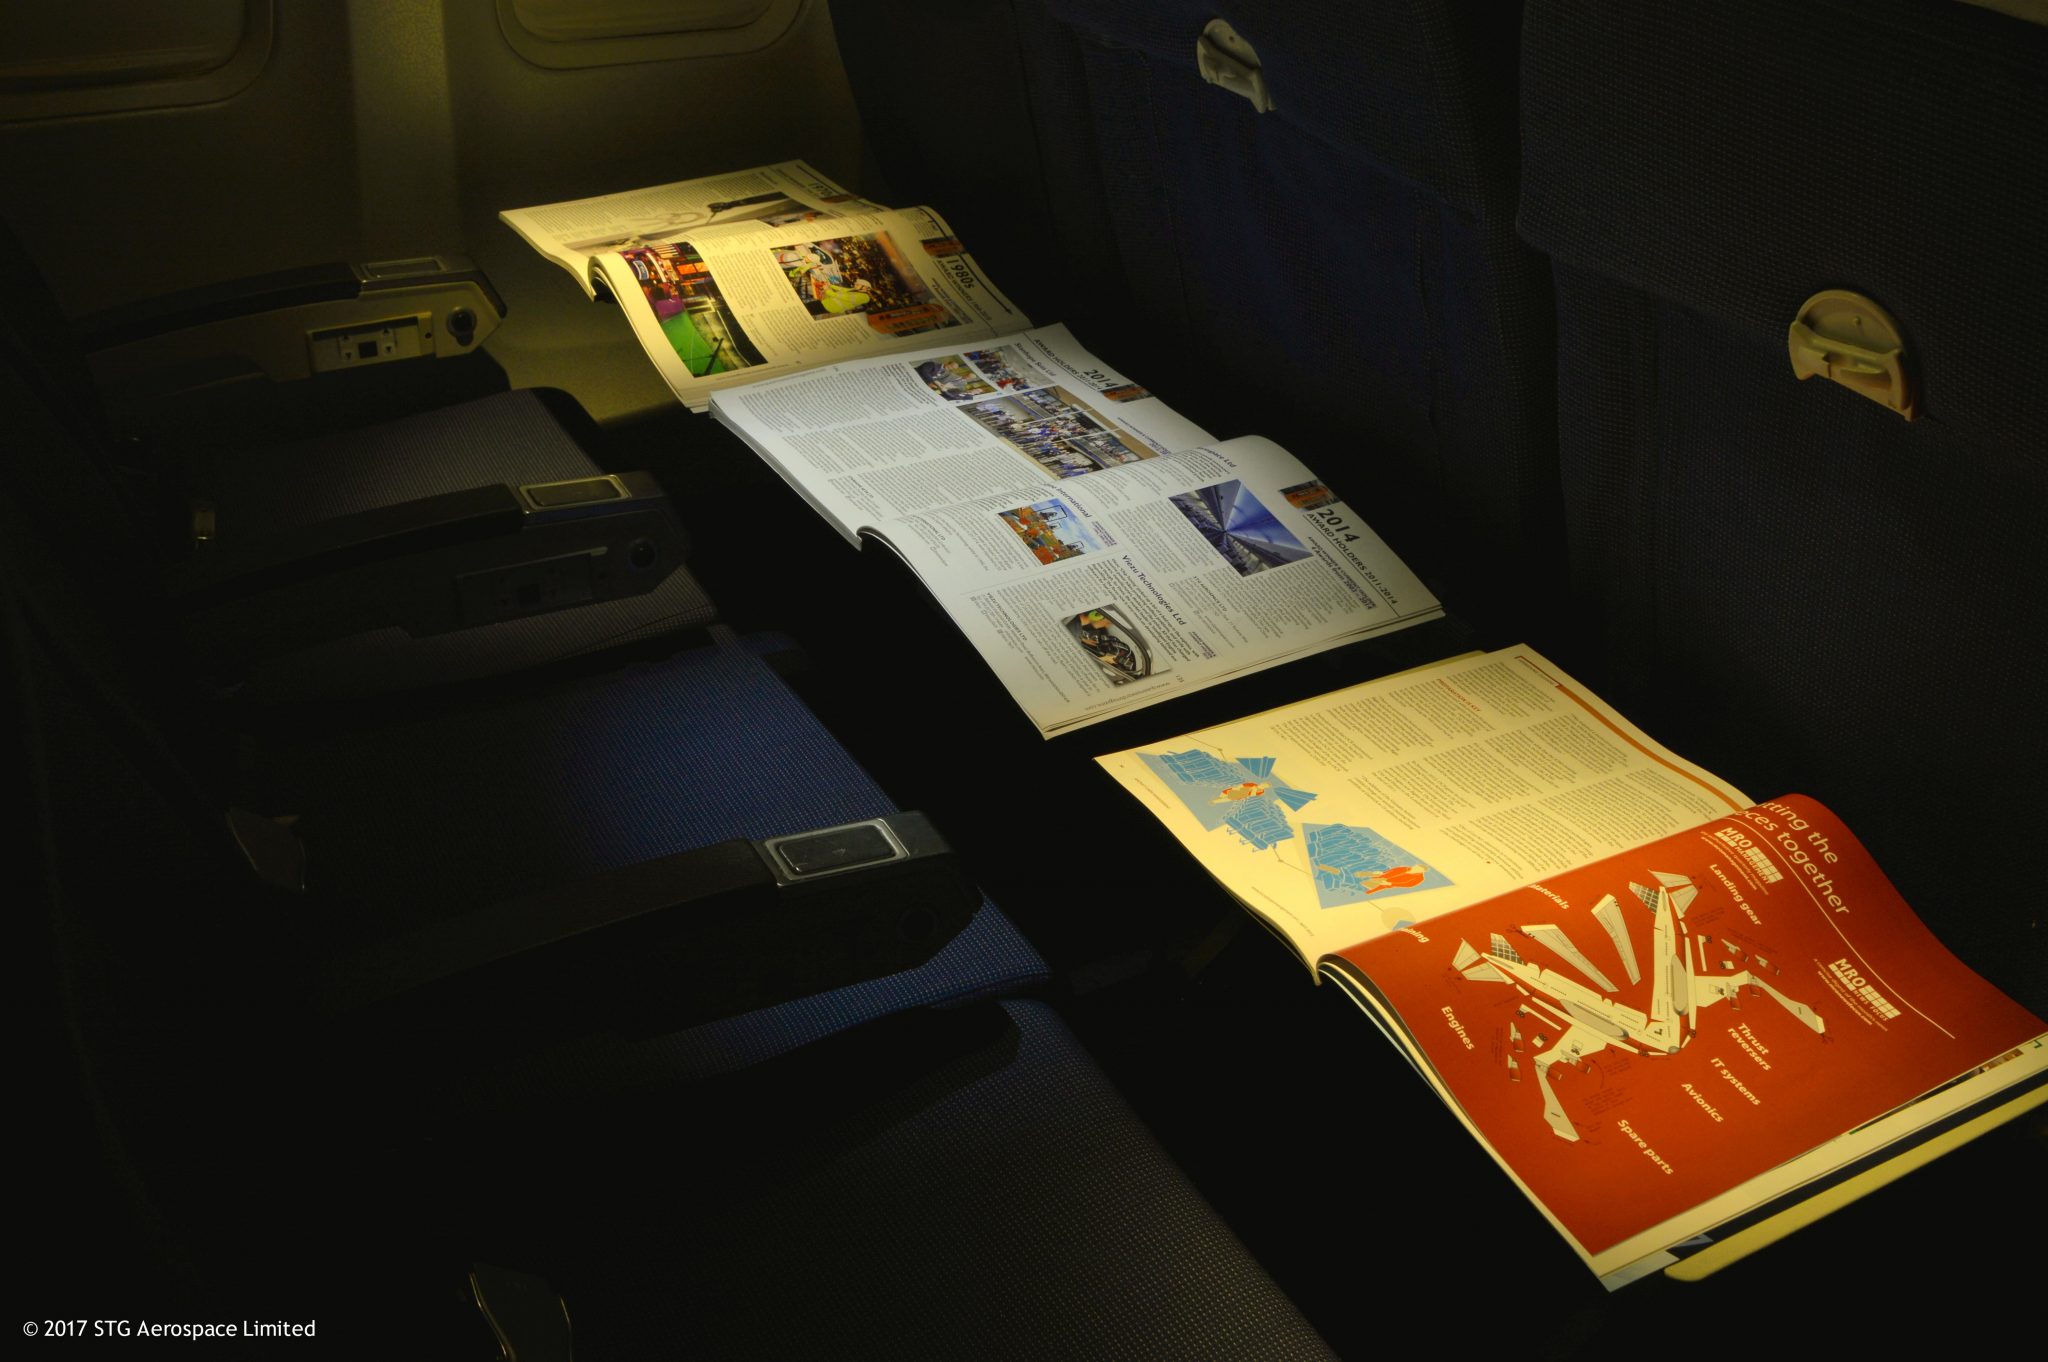 Blue Air and Titan Airways opt for liTeMood LED Reading Light